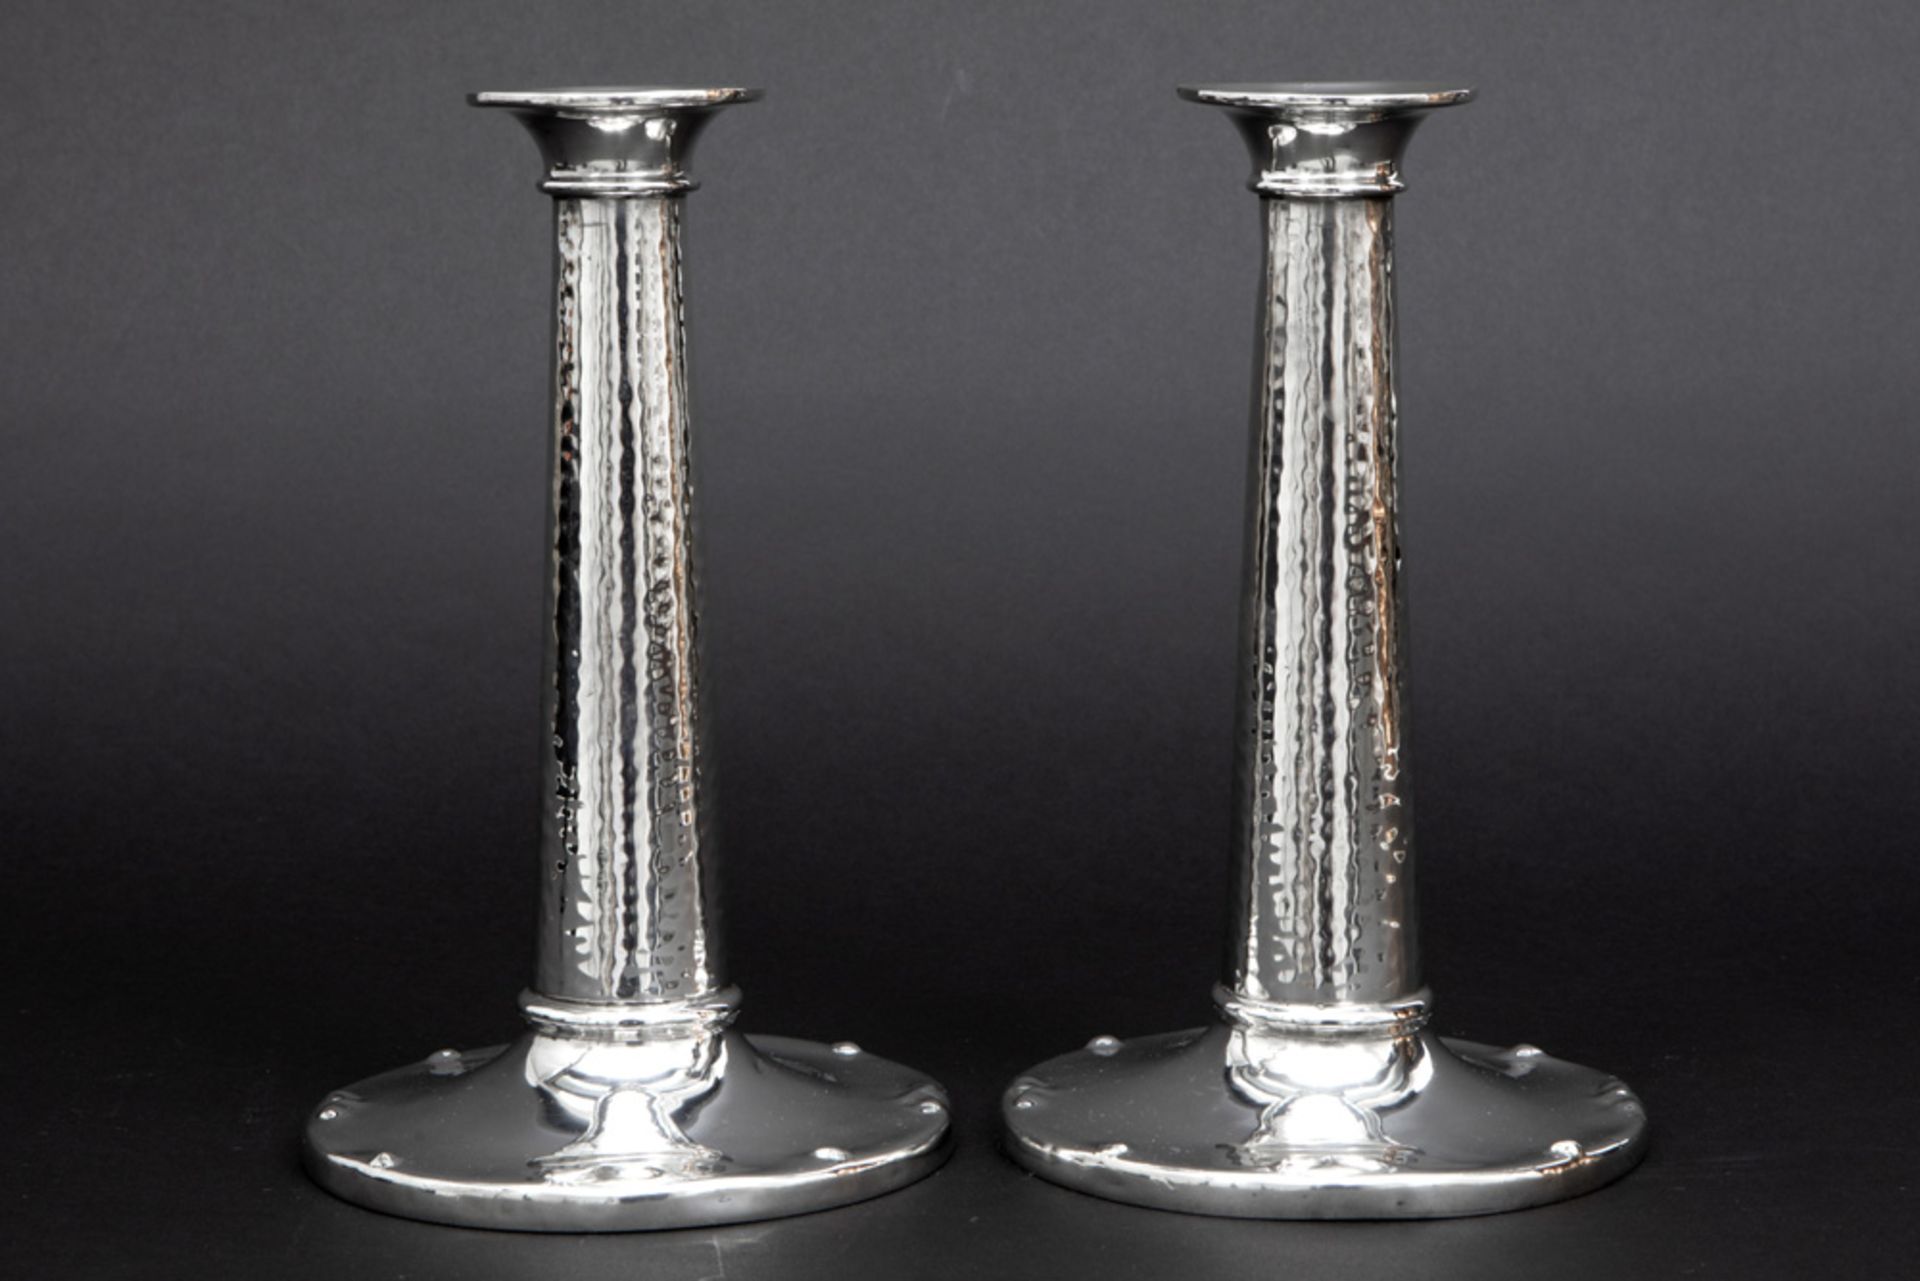 pair of English "Warric" marked Arts & Crafts candlesticks || Paar Engelse "Arts & Crafts"